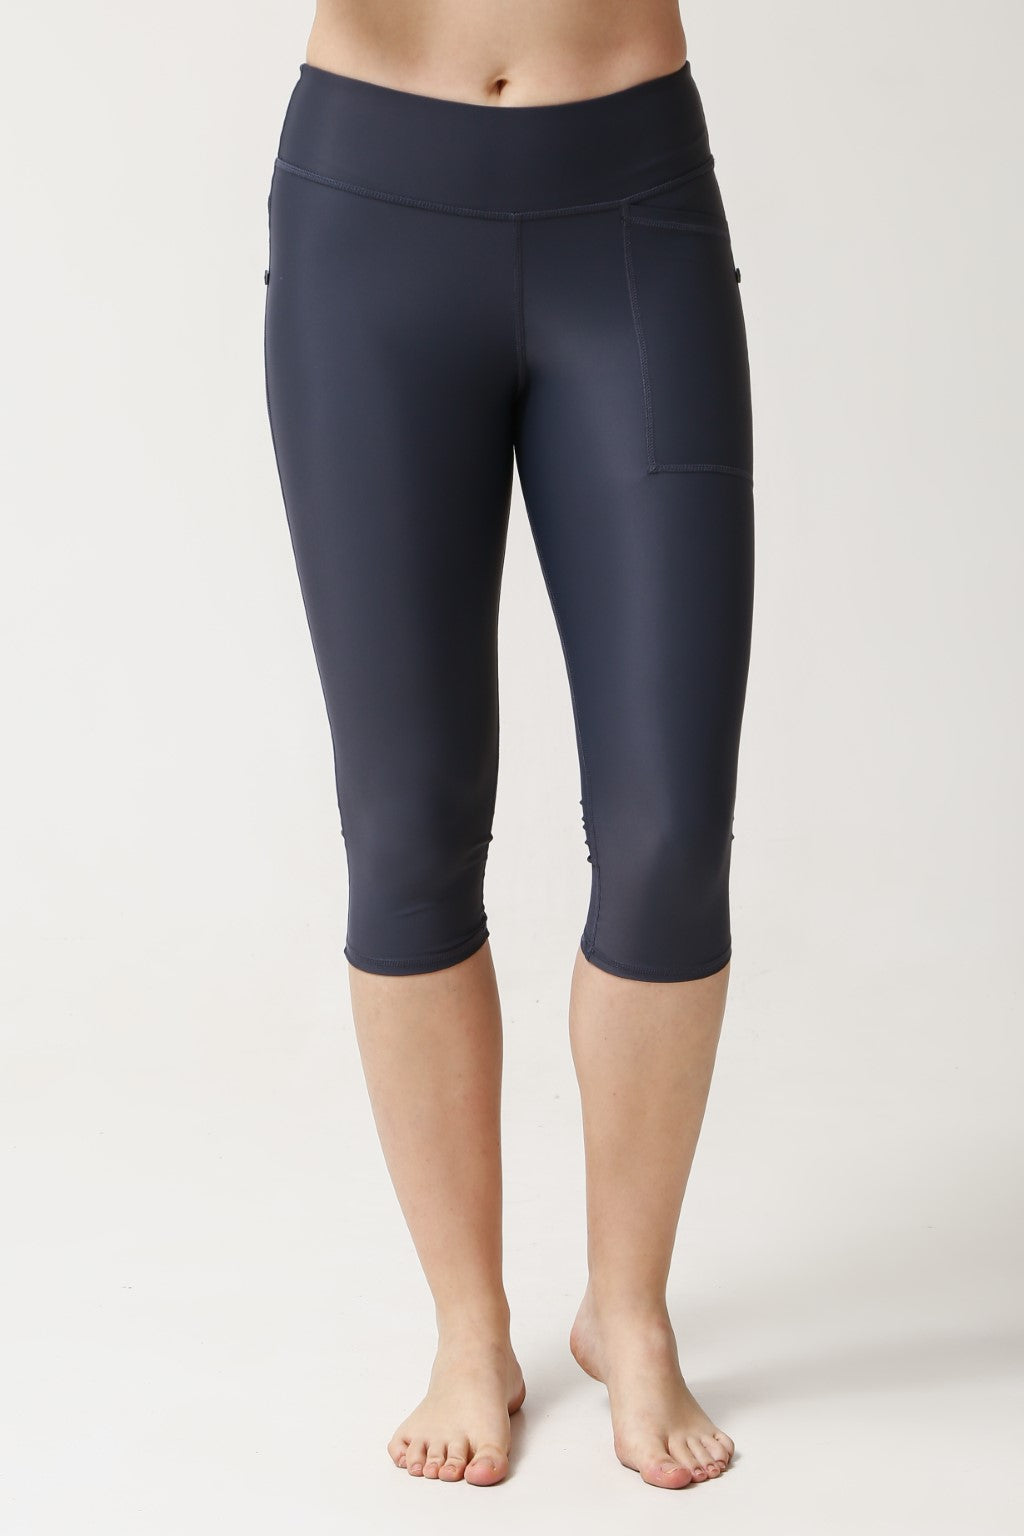 LULULEMON WOMEN'S FAST AND FREE HR TIGHT 28” BR Size US 4 UK 8